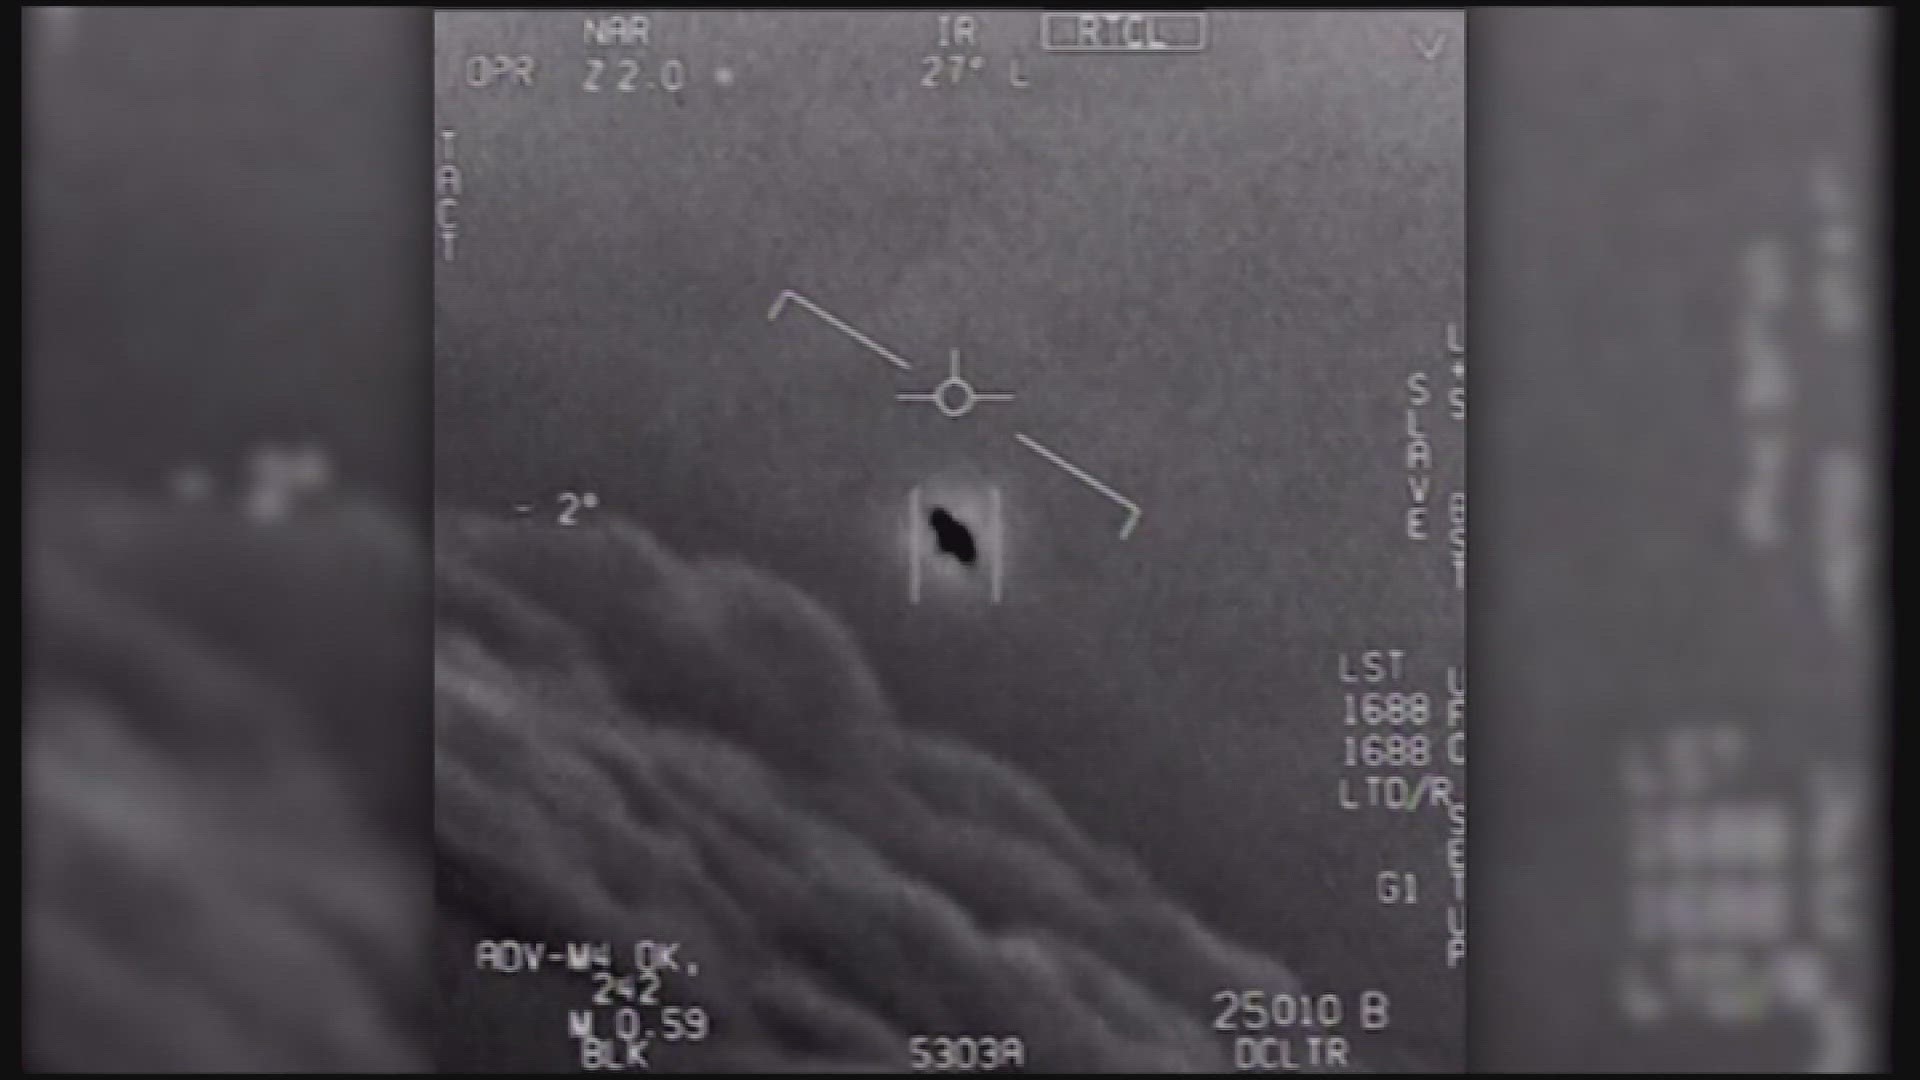 The new detection technology, GIMLET, is being tested in Texas to get more information about unidentified flying objects.